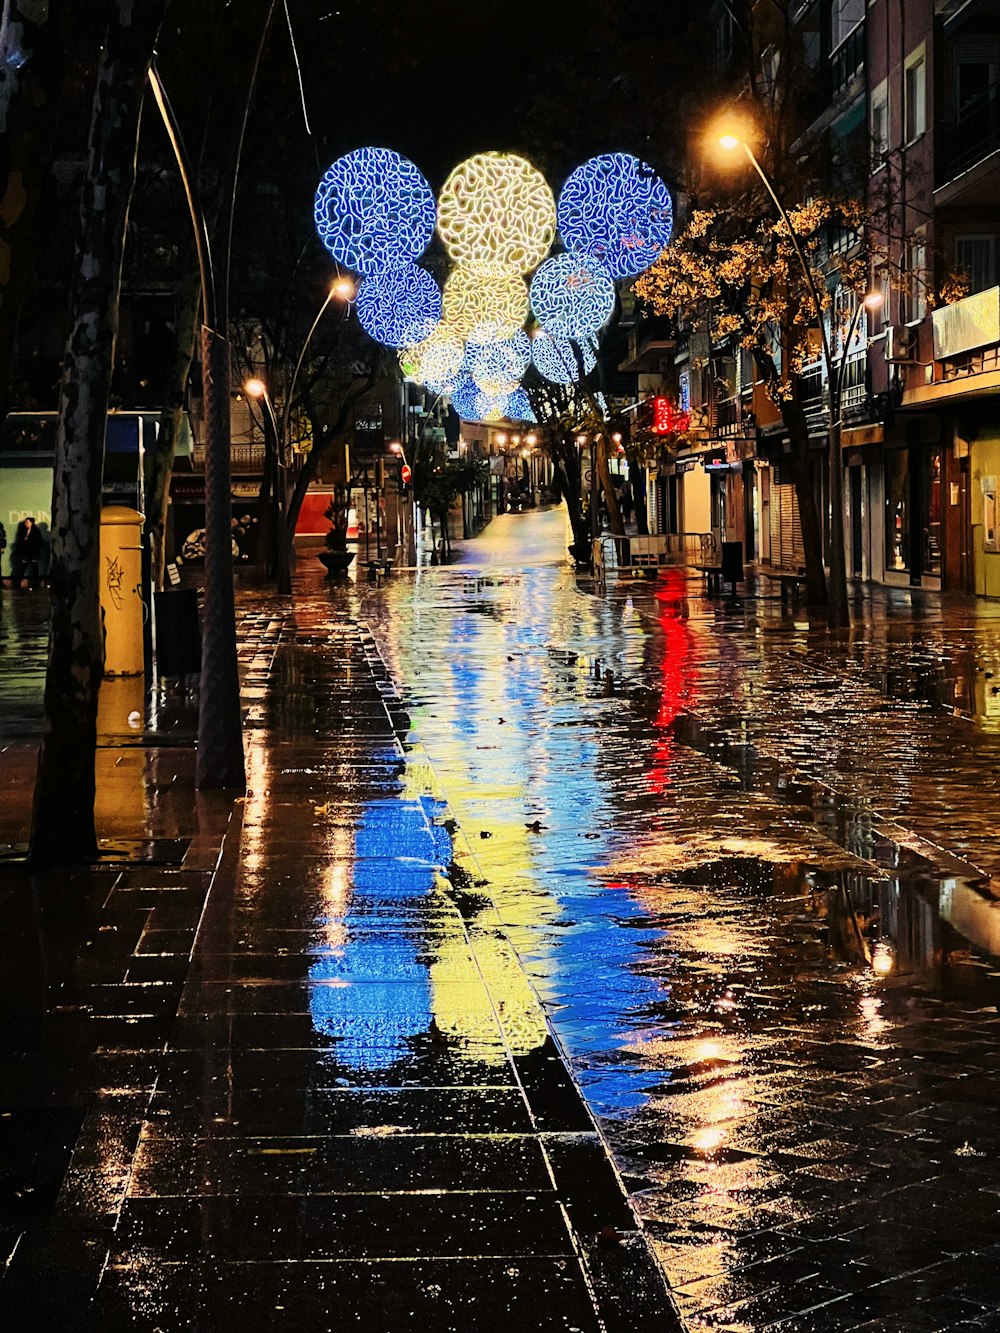 a city street at night with lights and umbrellas